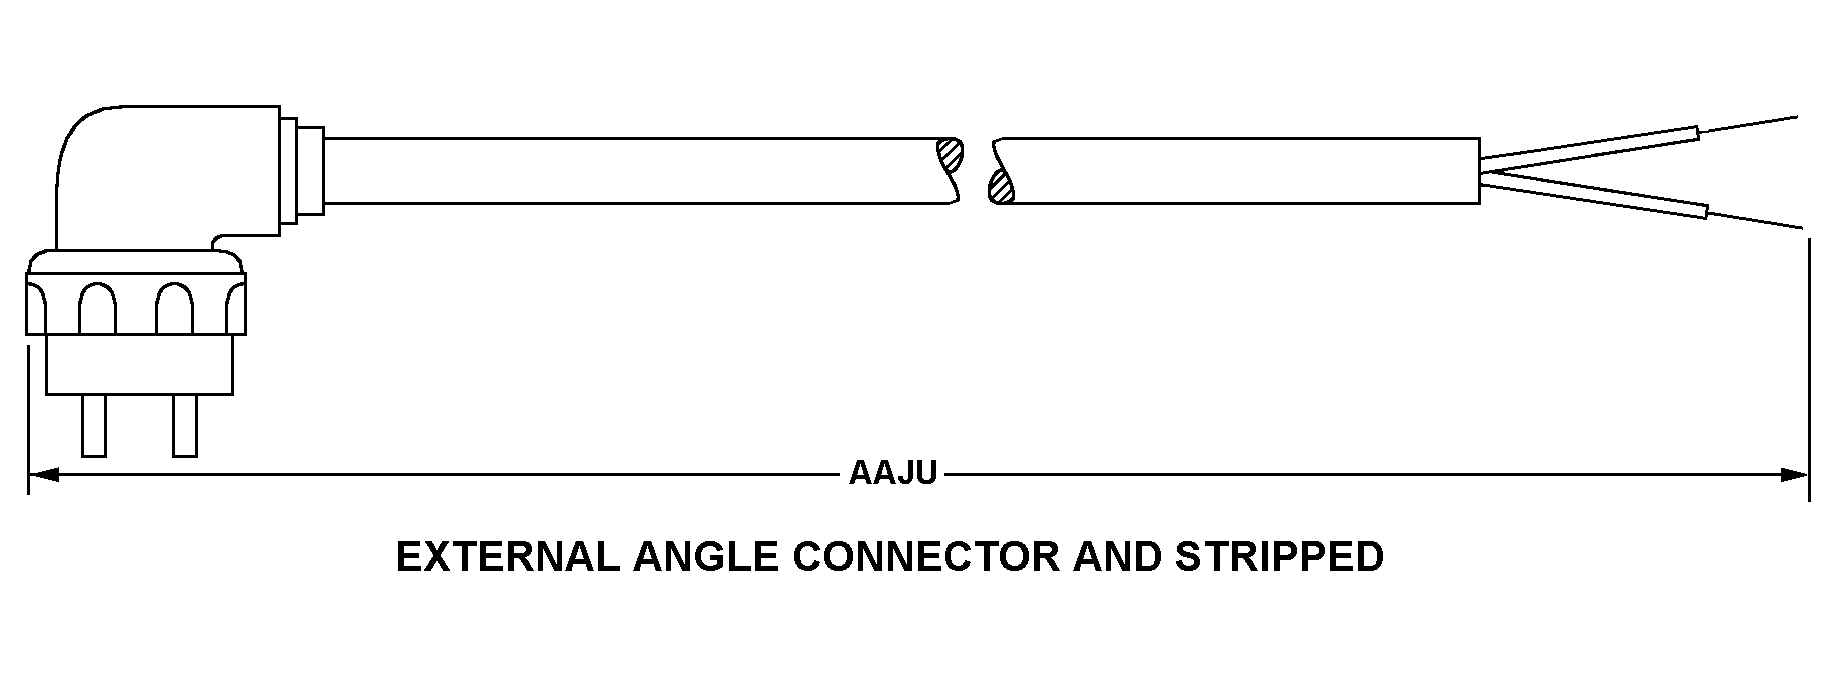 EXTERNAL ANGLE CONNECTOR AND STRIPPED style nsn 5995-01-091-0252